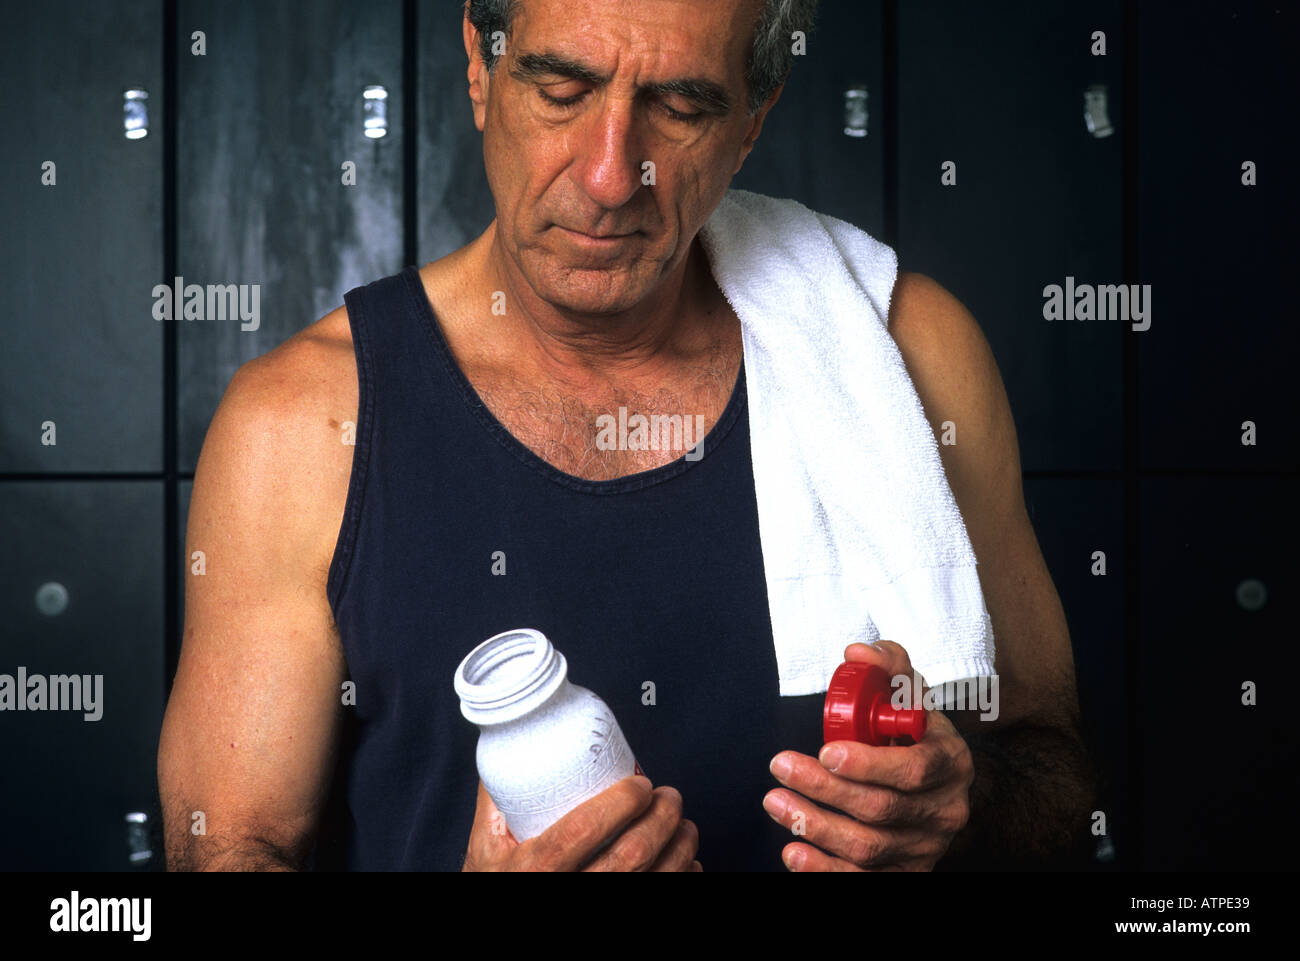 Mature Man Prepares Of His Workout In The Locker Room Stock Photo Alamy